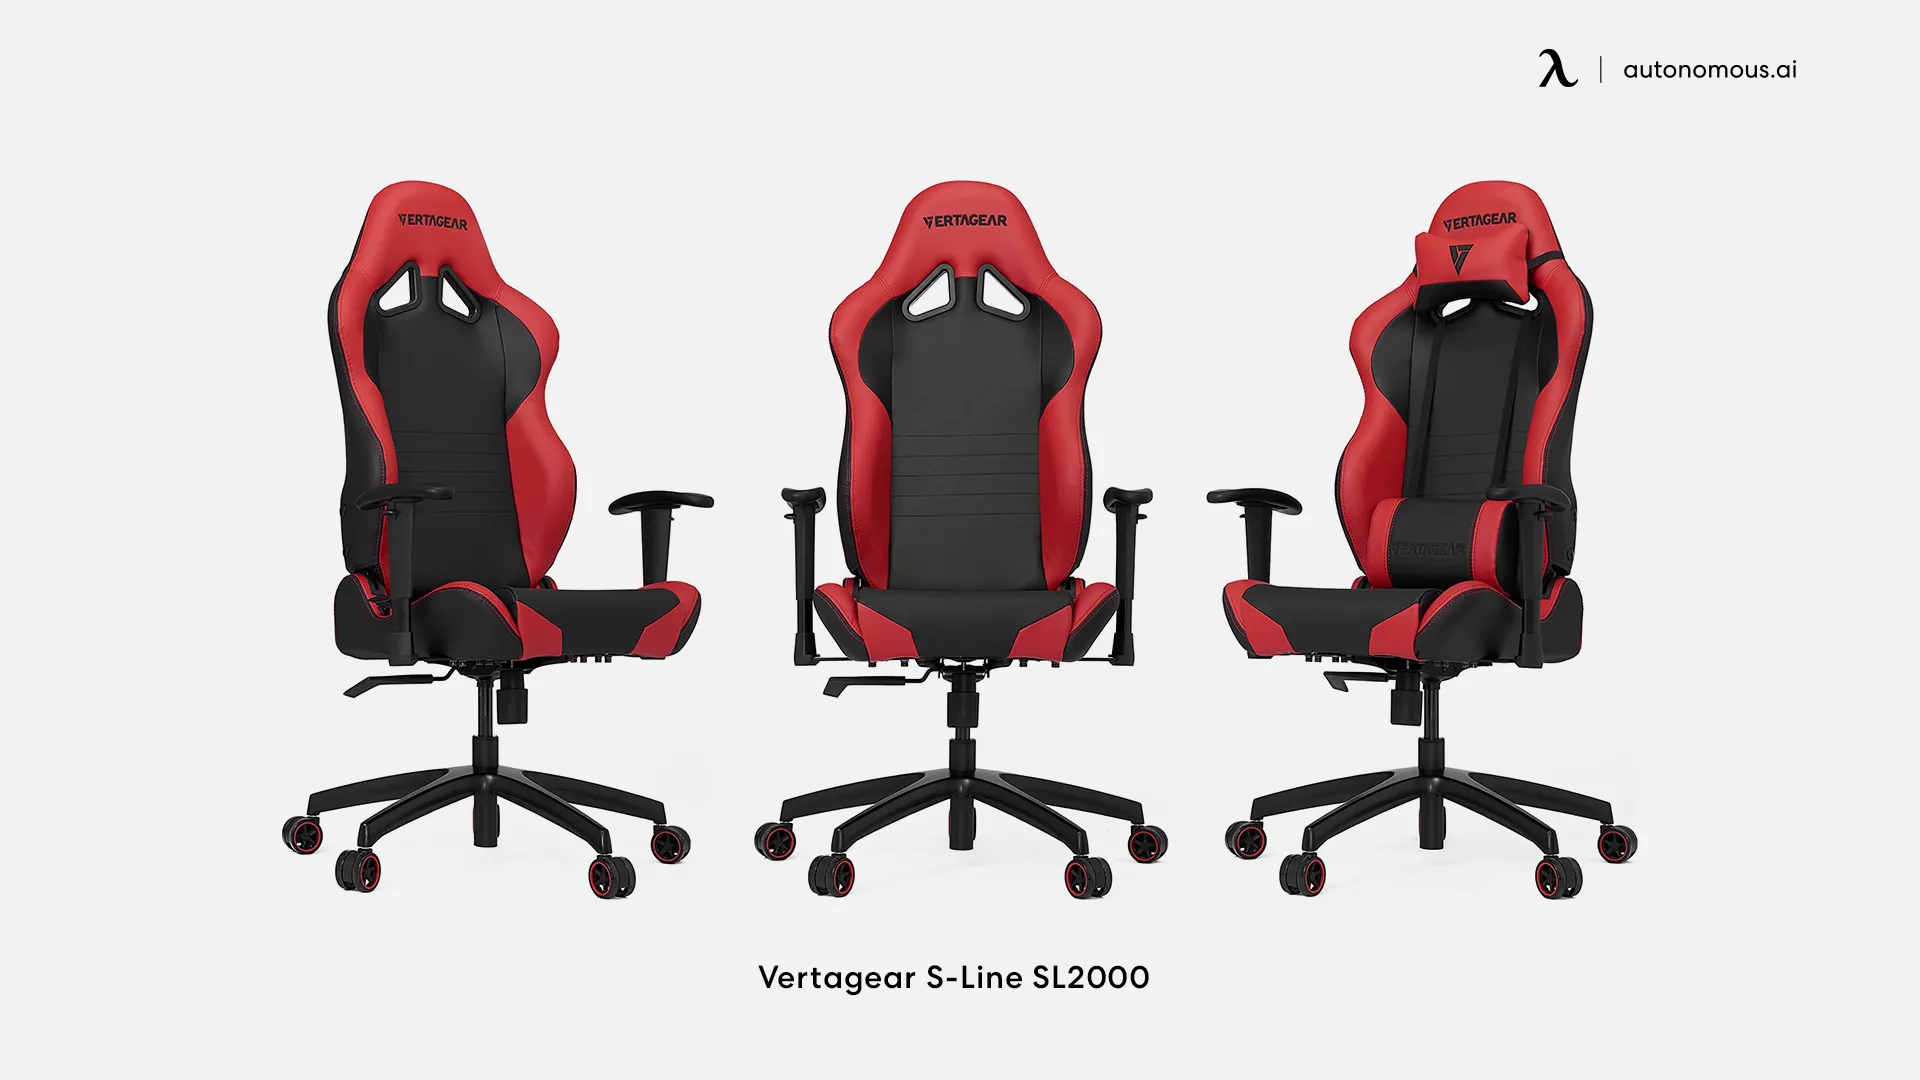 Vertagear S-Line SL2000 red gaming chair